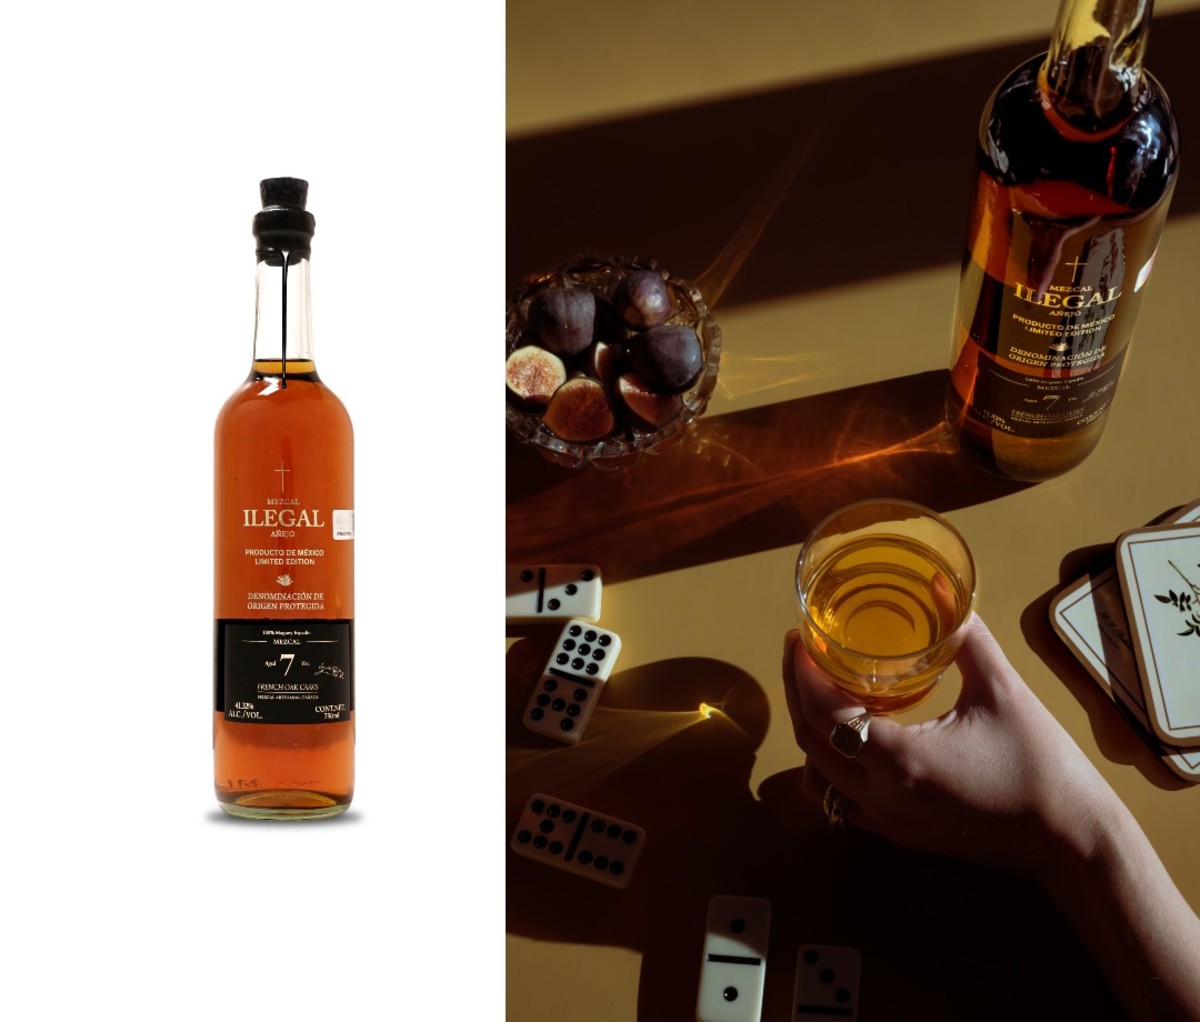 Image right depicts bottle of Ilegal Mezcal 7-Year Añejo on table with hand holding half-filled glass. Image right depicts same bottle against white backdrop.